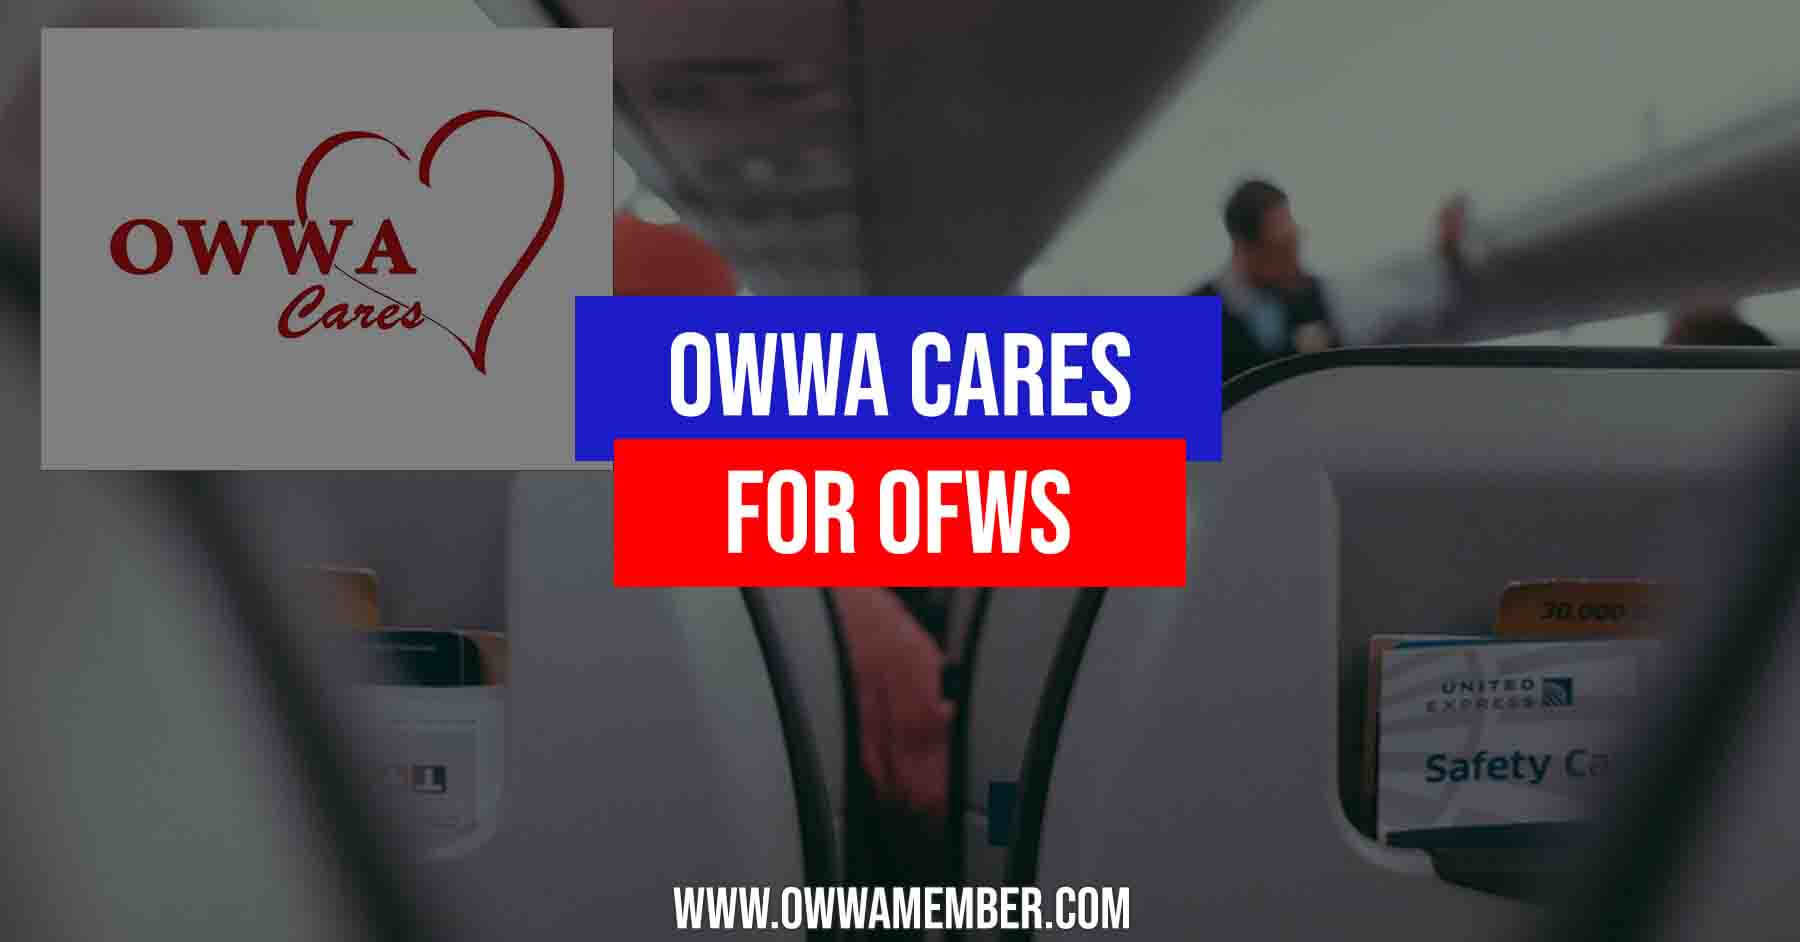 how owwa cares for ofws